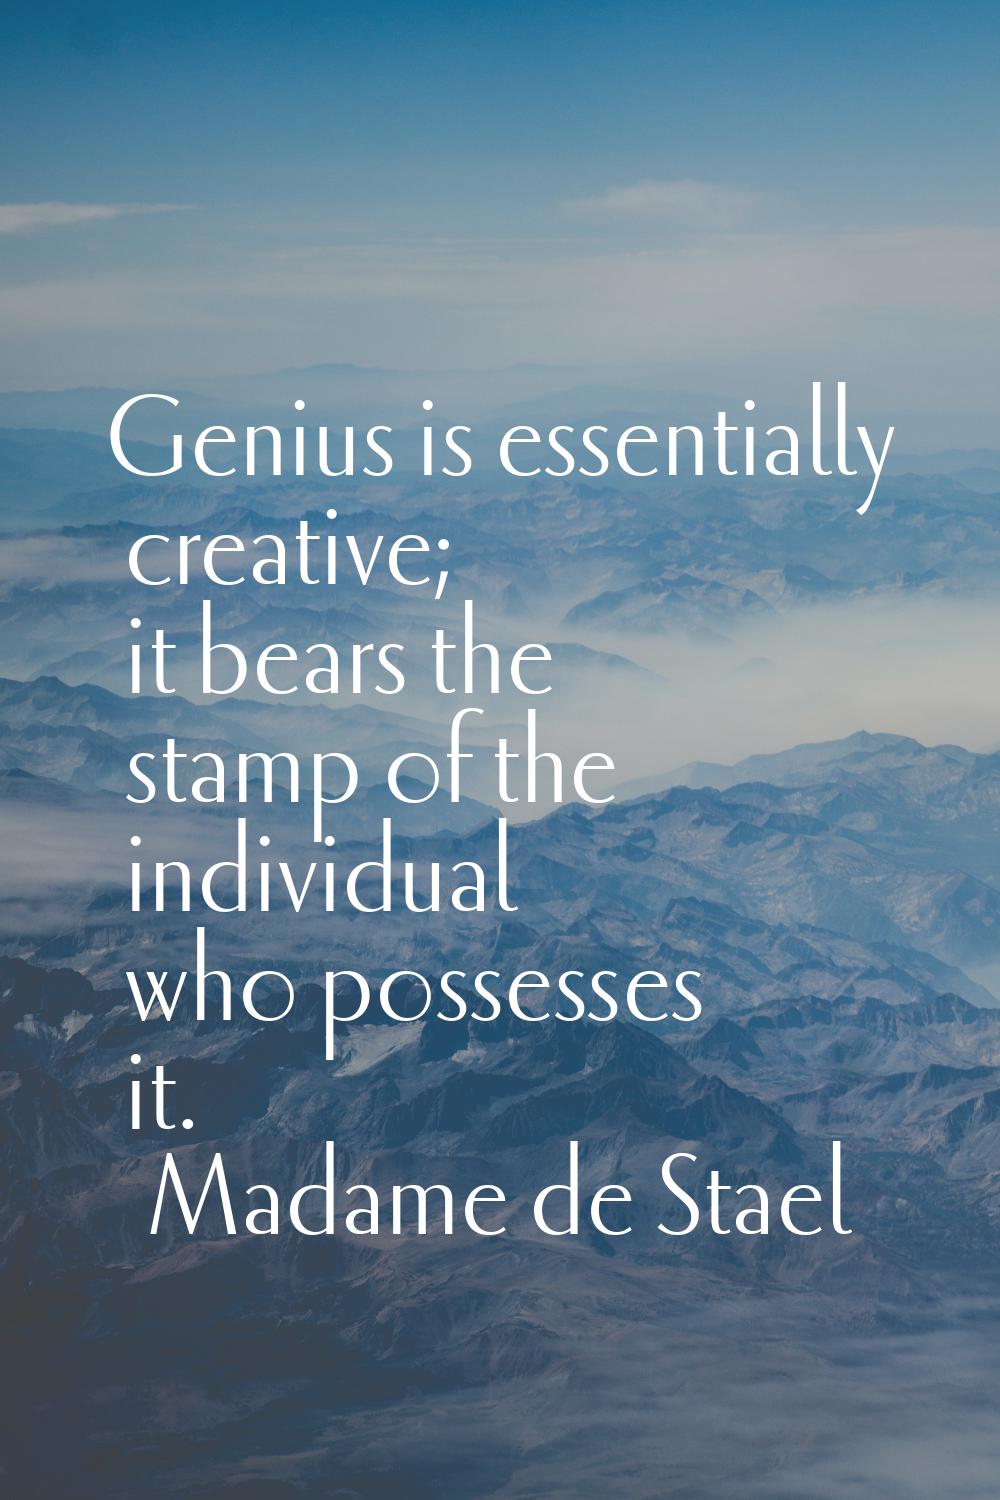 Genius is essentially creative; it bears the stamp of the individual who possesses it.